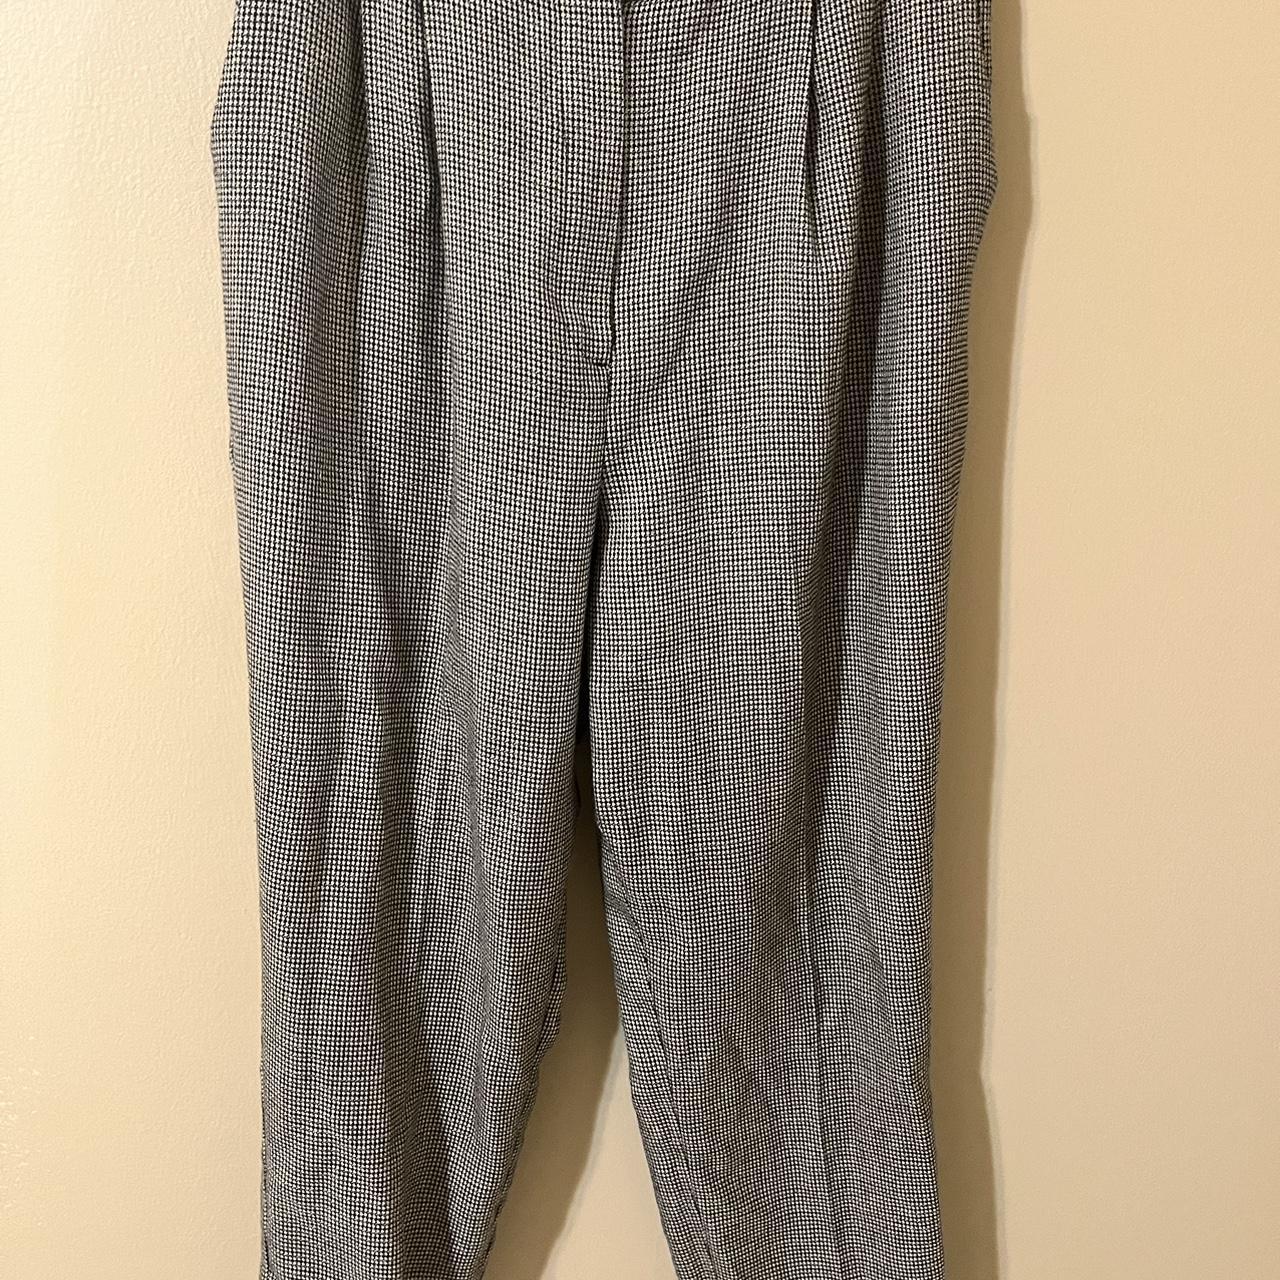 Sag Harbor Women's Grey and Black Trousers (2)